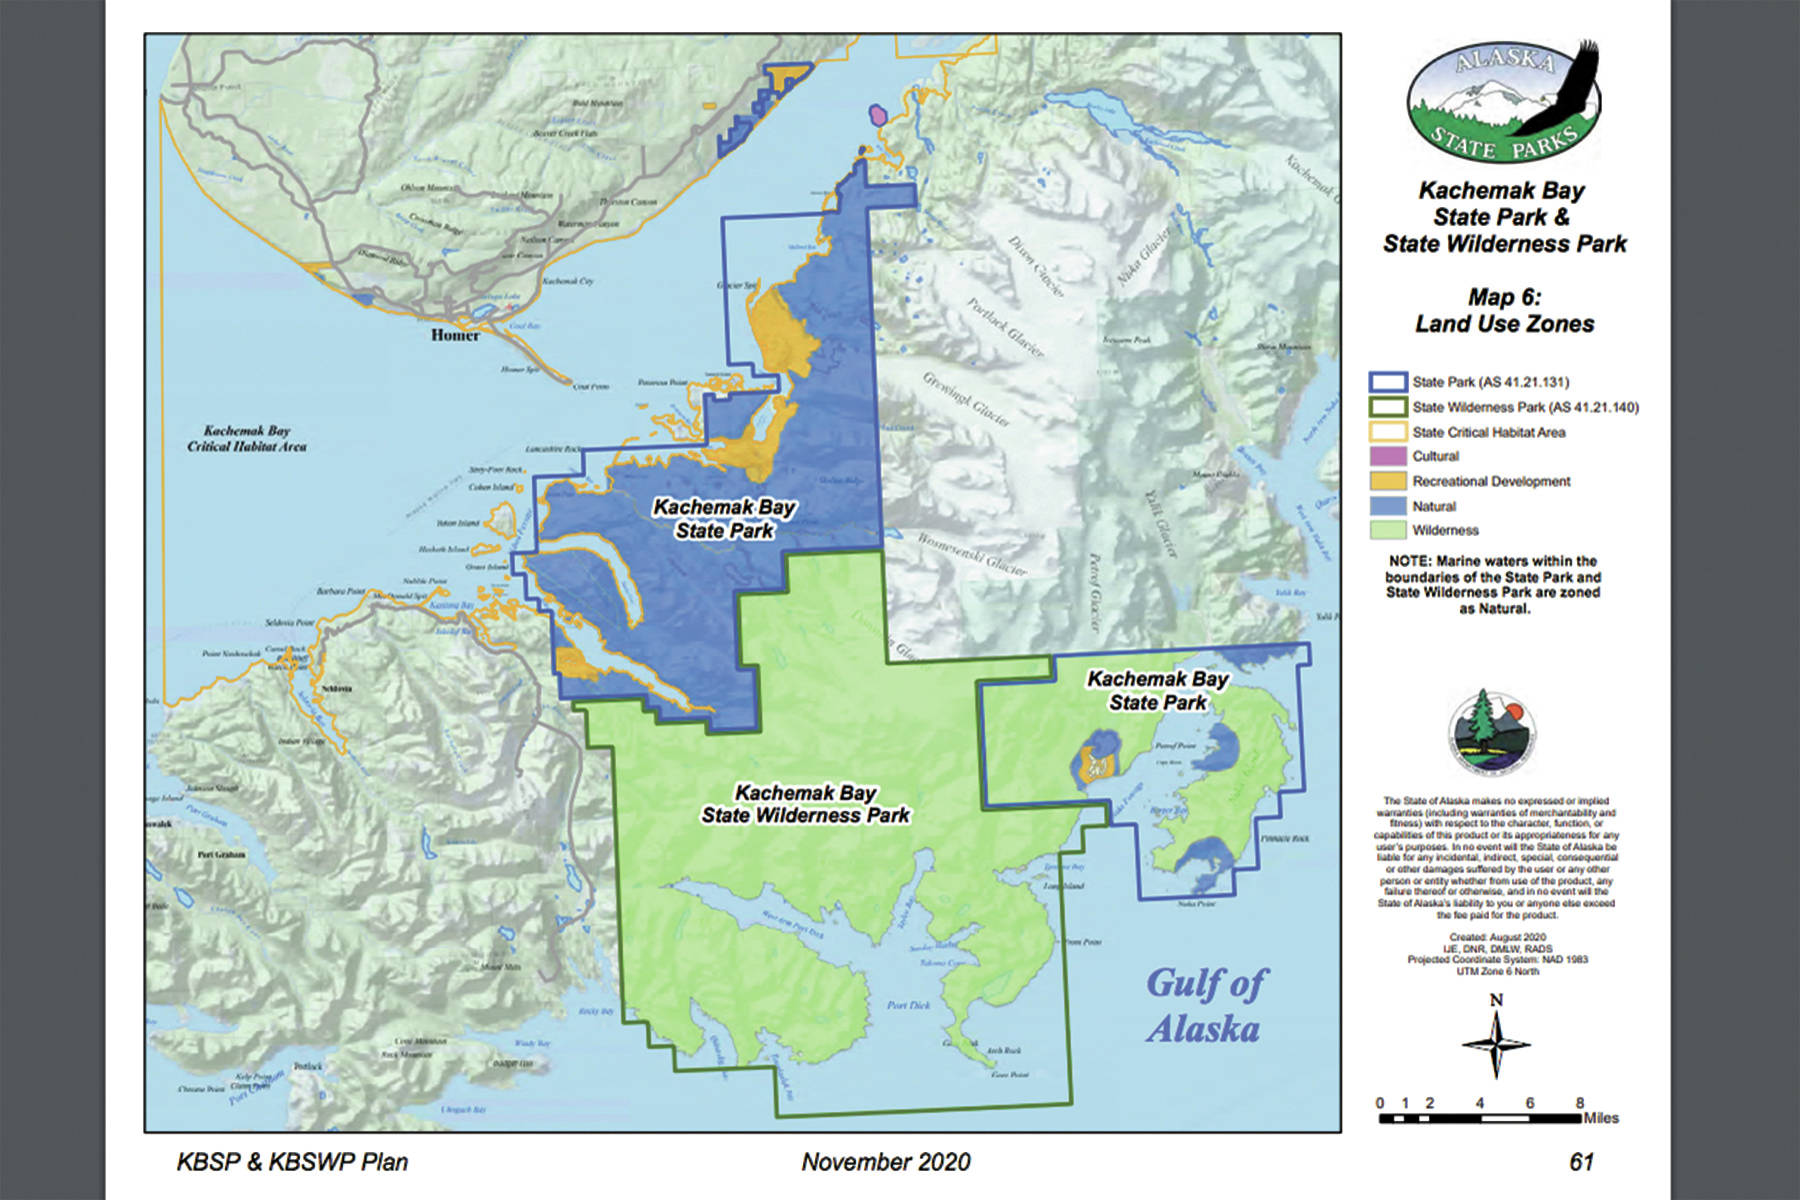 This map shows the boundaries of Kachemak Bay State Park and Kachemak Bay State Wilderness Park. (Image courtesy Alaska Department of Natural Resources, KBSP and KBSWP management plan)